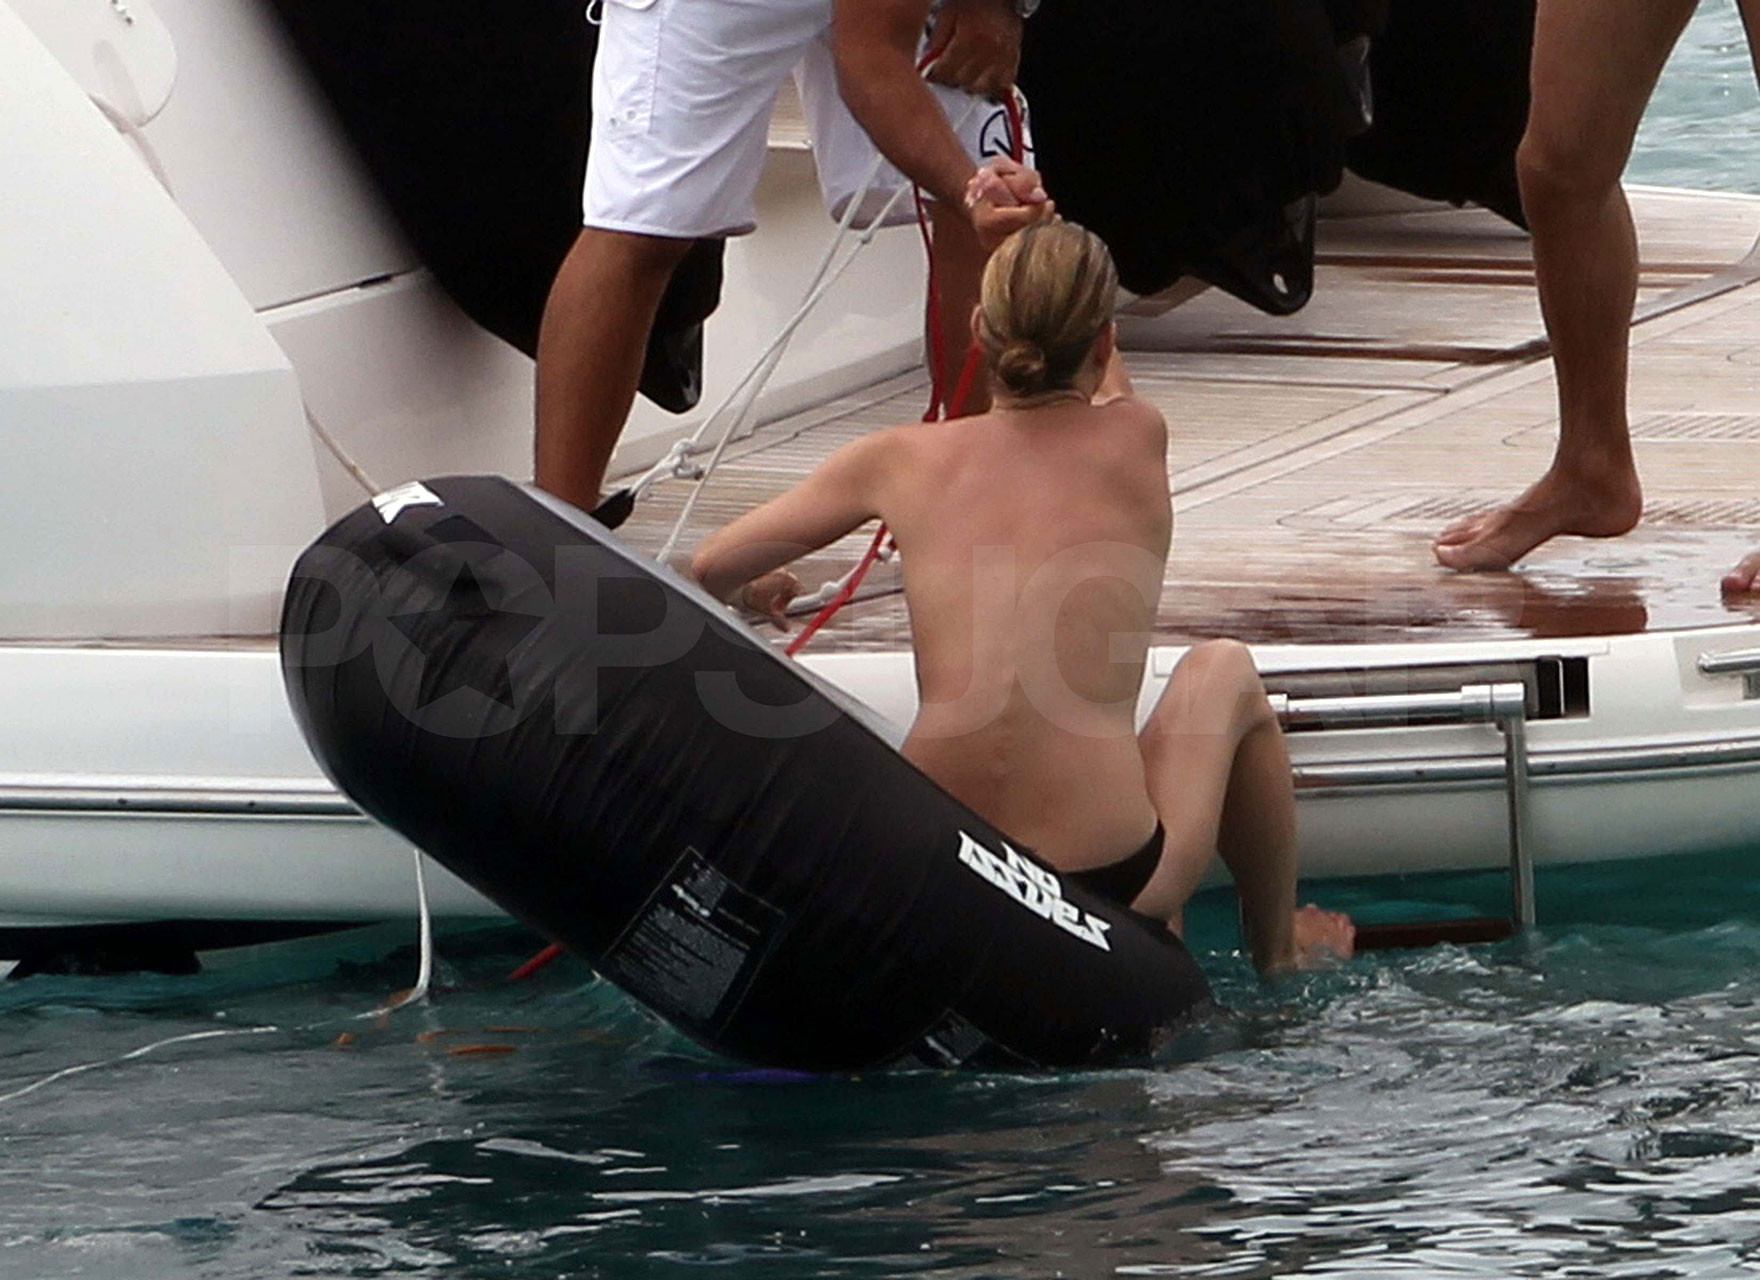 Kate Moss enjoying with her boyfriend on yacht in topless paparazzi photos #75347949